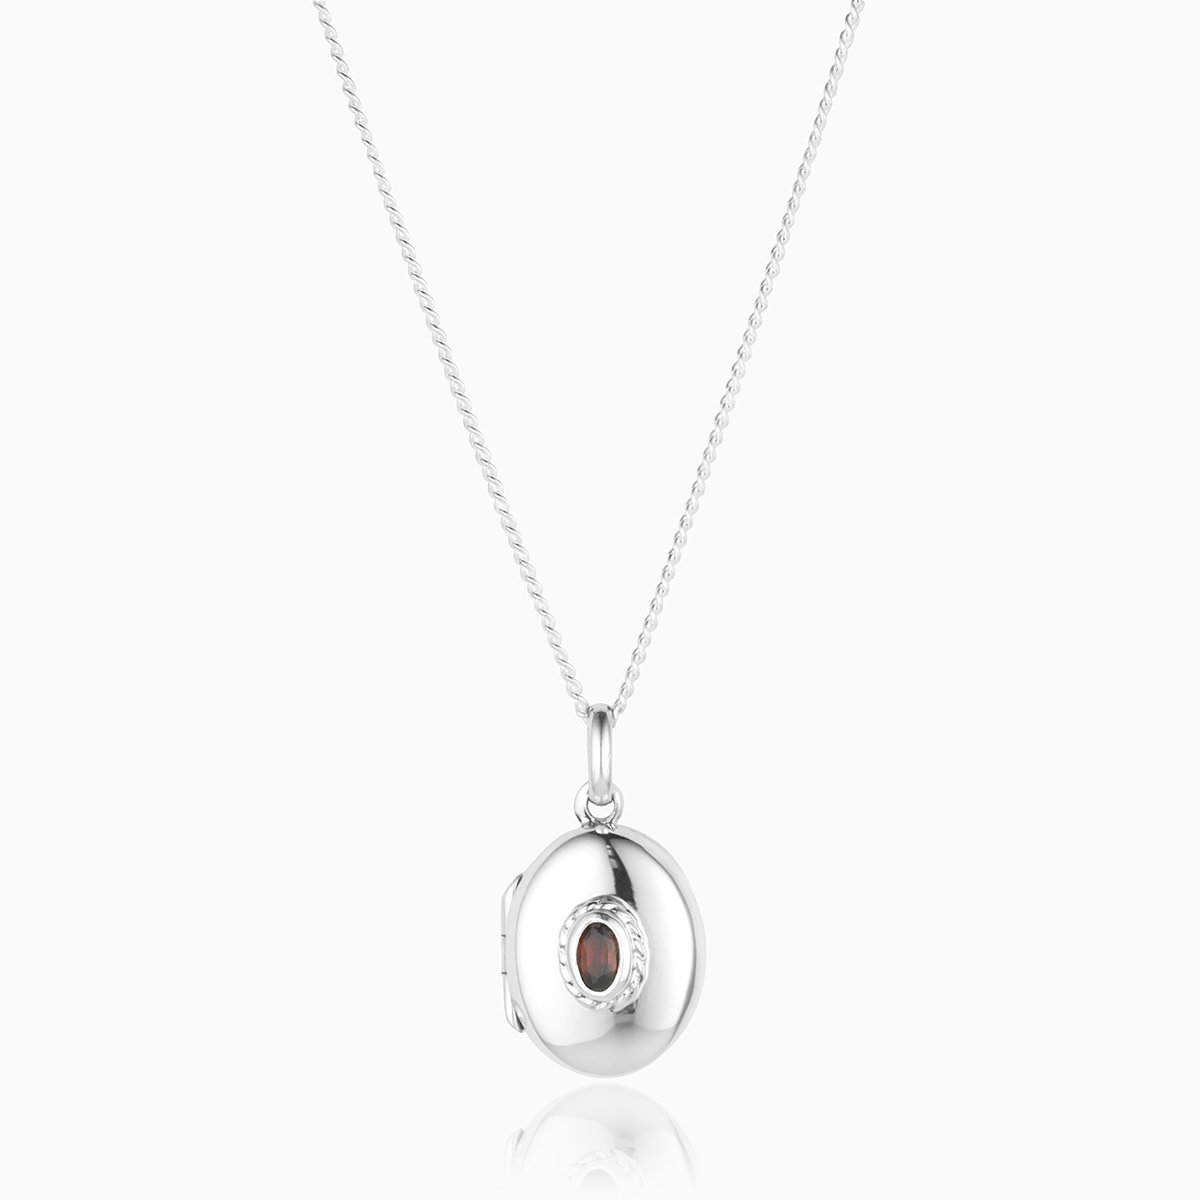 Product title: Silver and Garnet Locket, product type: Locket